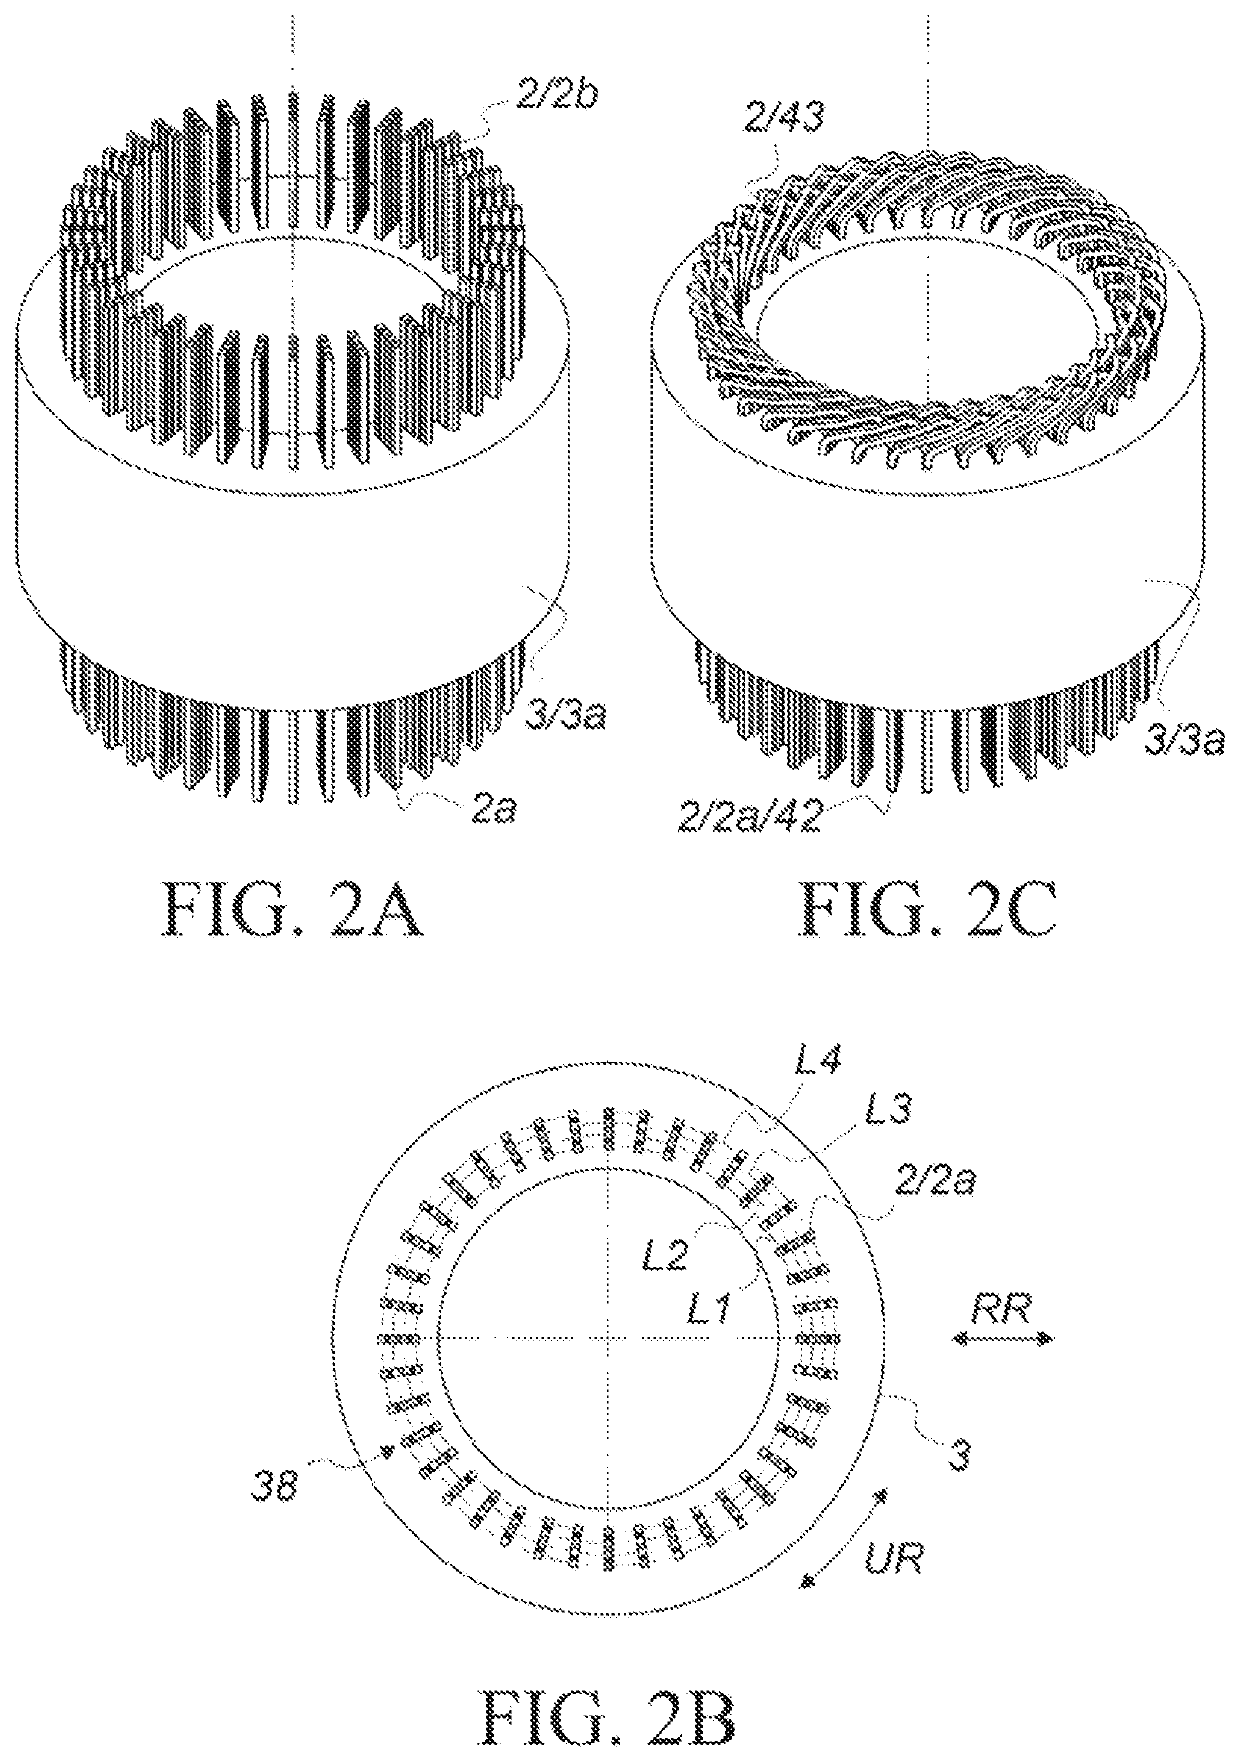 Apparatus for bending ends, arranged in annular layers, of bar conductors of a stator of an electrical machine